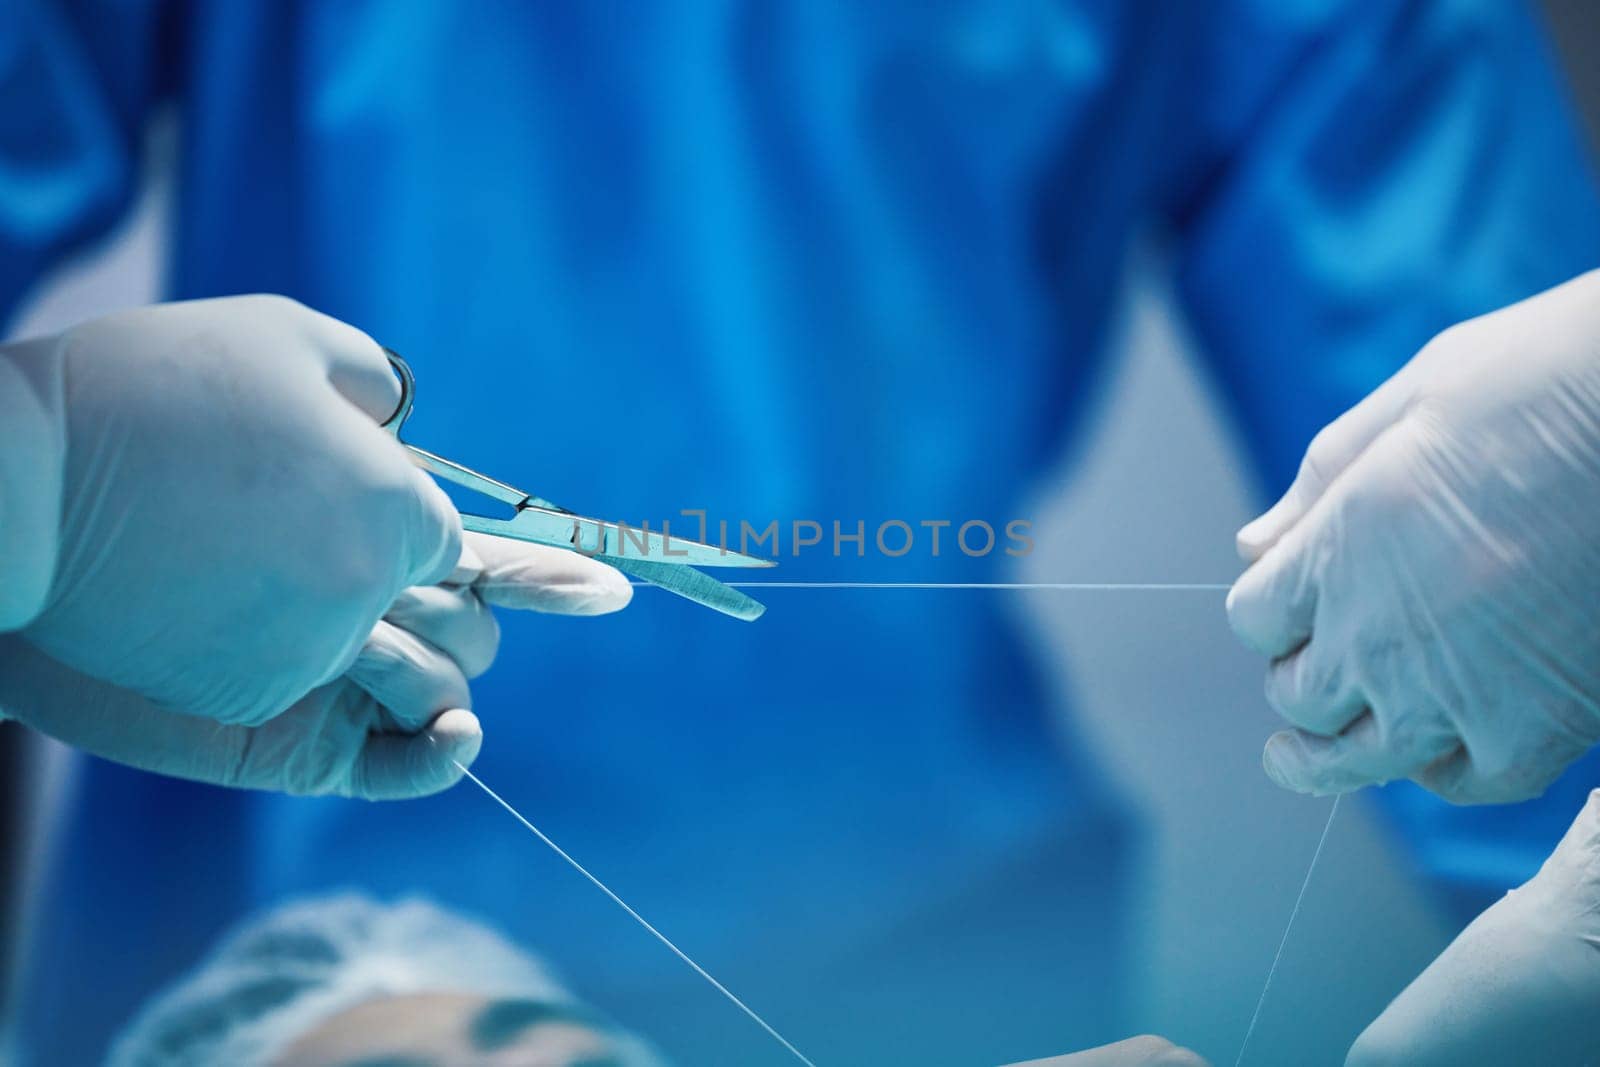 Surgery, hands and doctor cutting thread, stitching patient and surgical procedure with health insurance. People in medicine, surgeon with scissors and medical tools with collaboration in hospital.